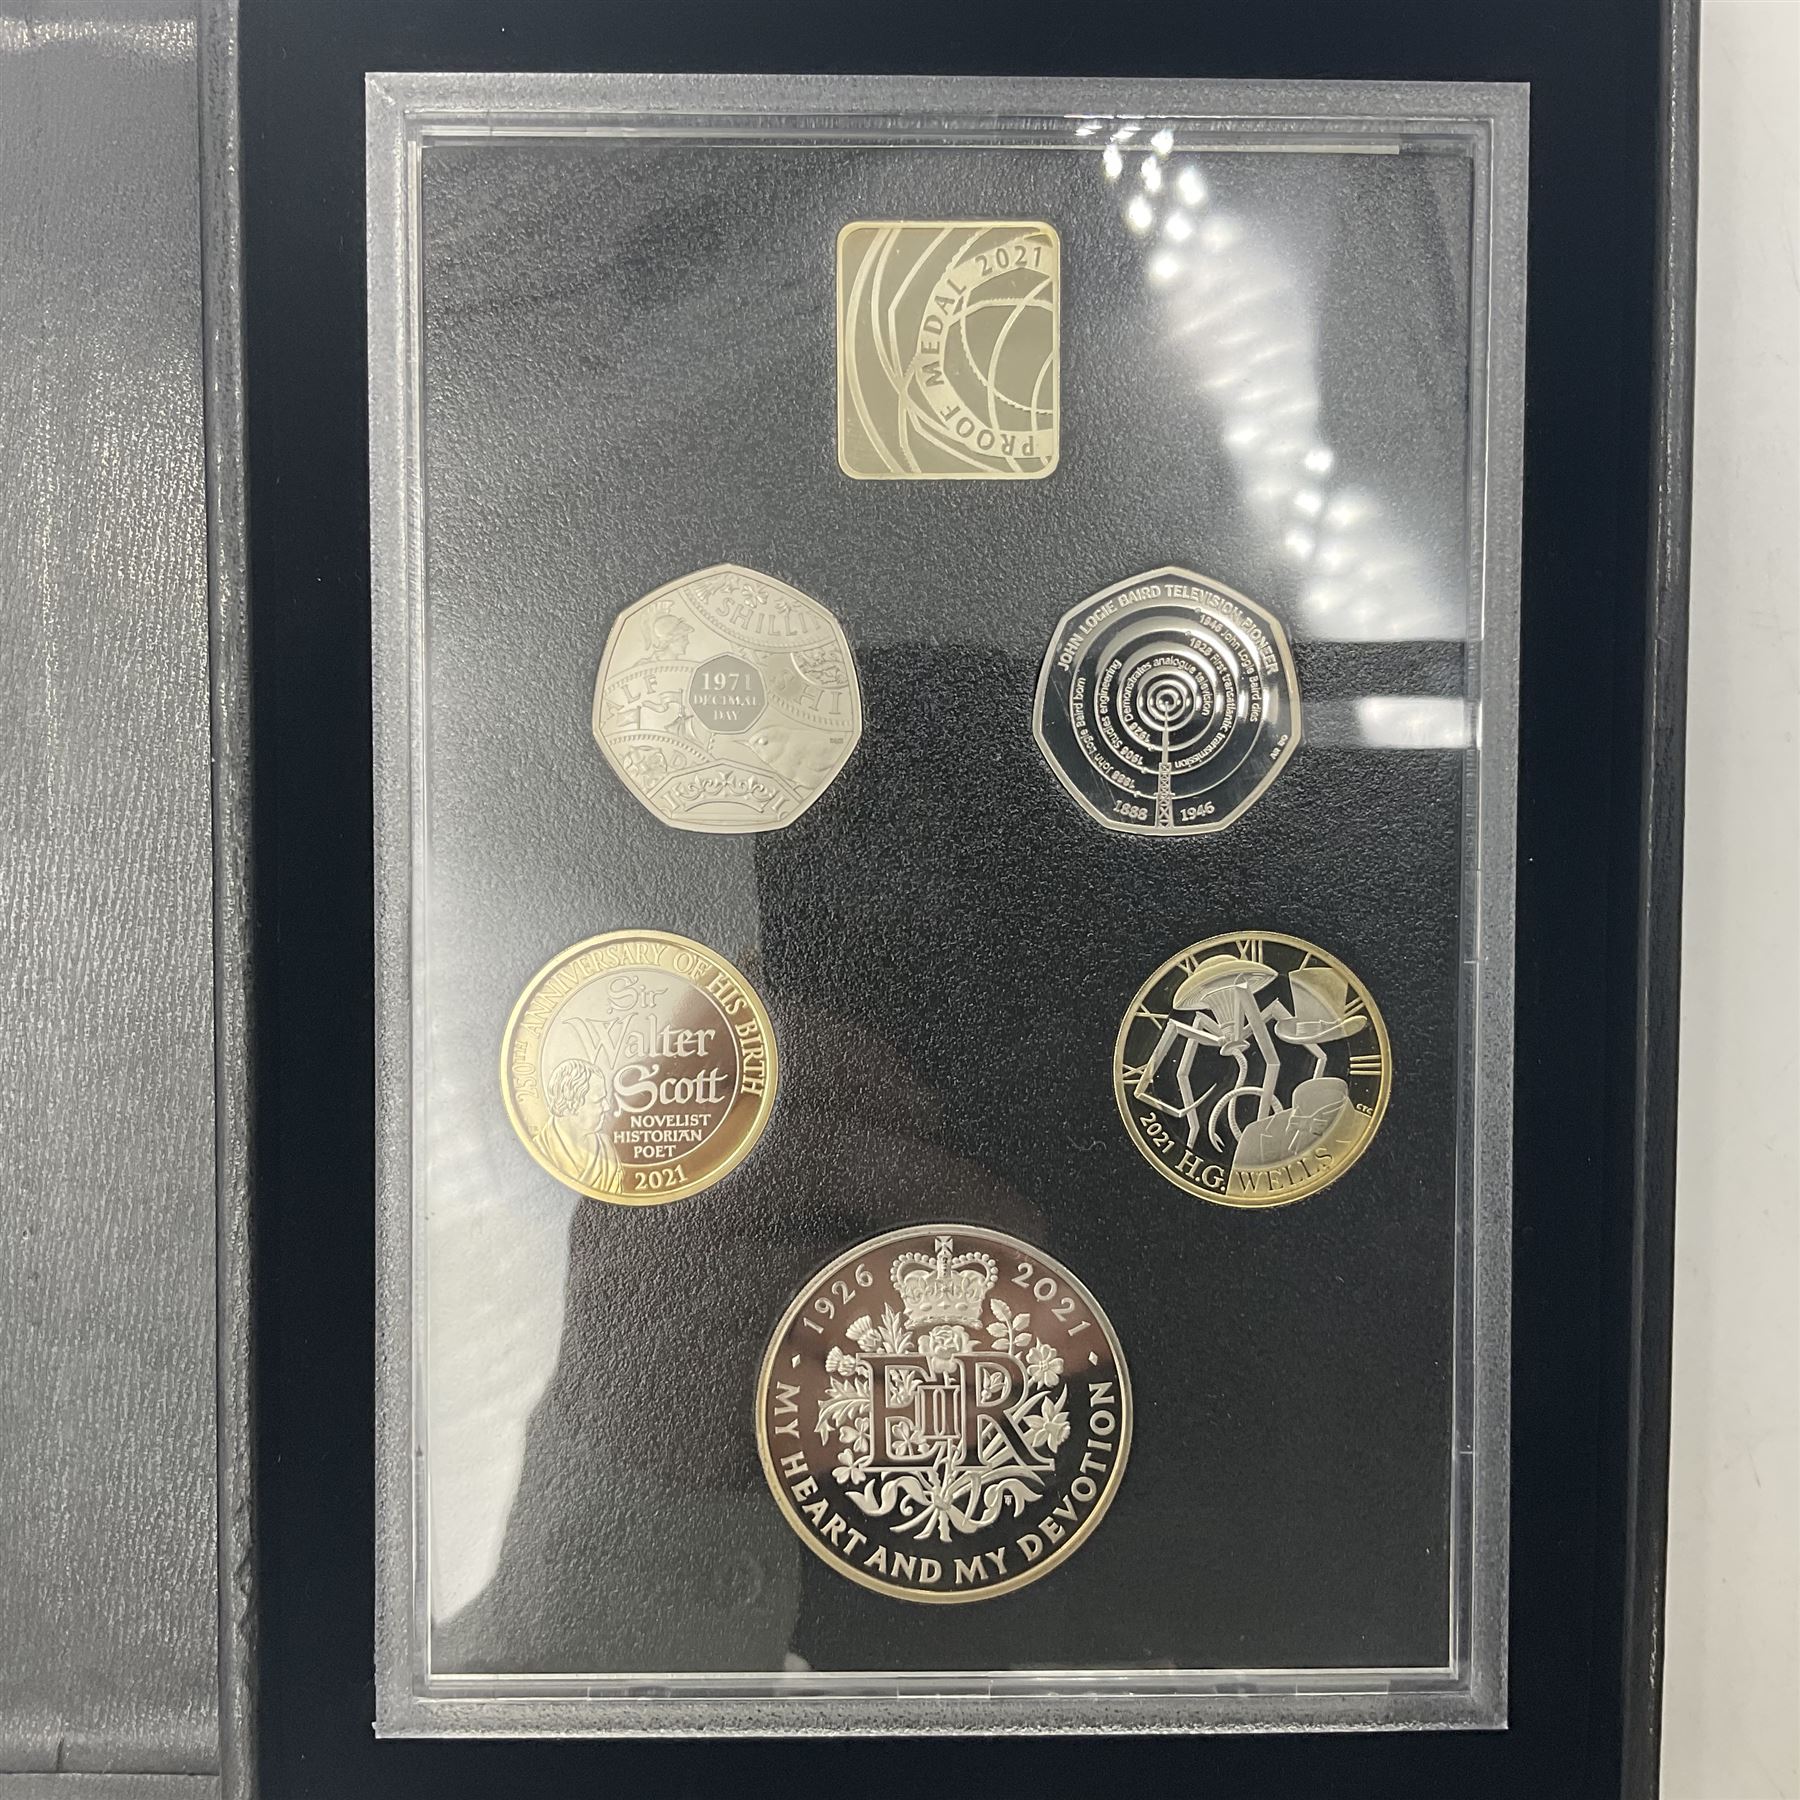 The Royal Mint United Kingdom 2021 proof coin set - Image 3 of 7